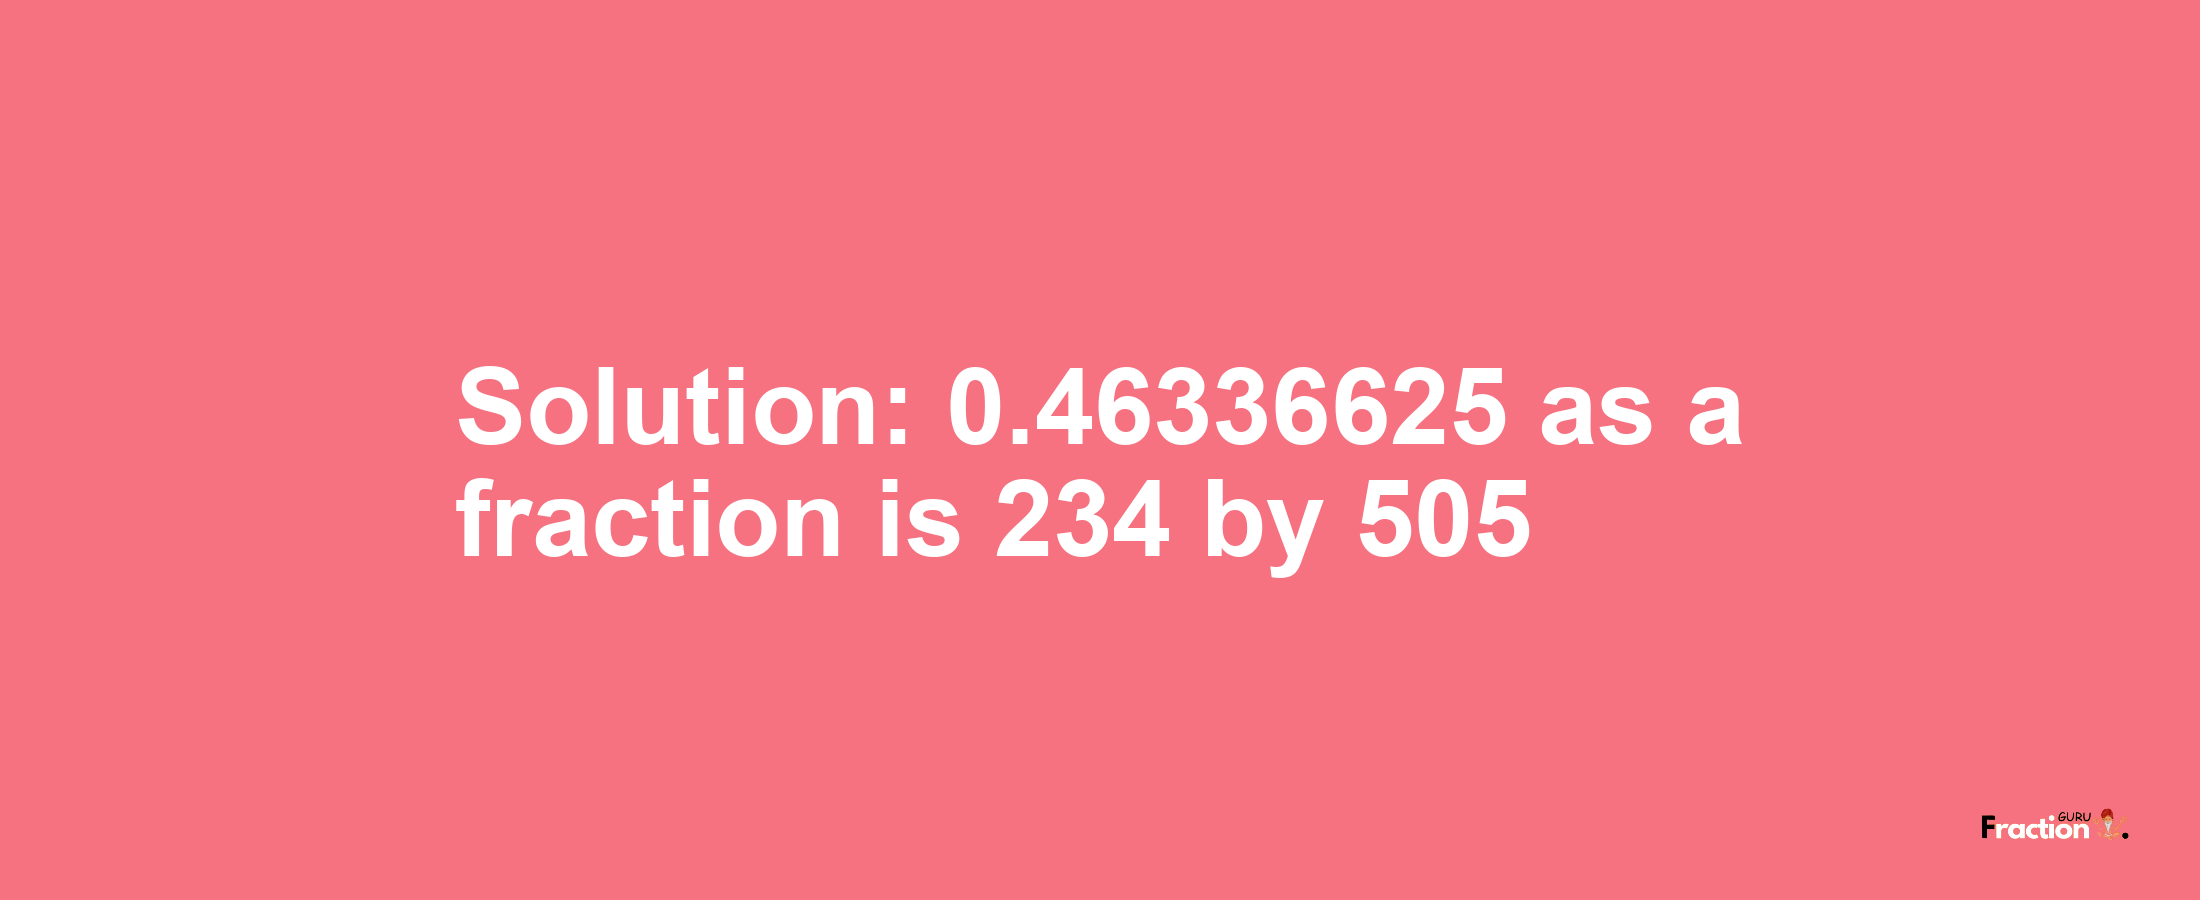 Solution:0.46336625 as a fraction is 234/505